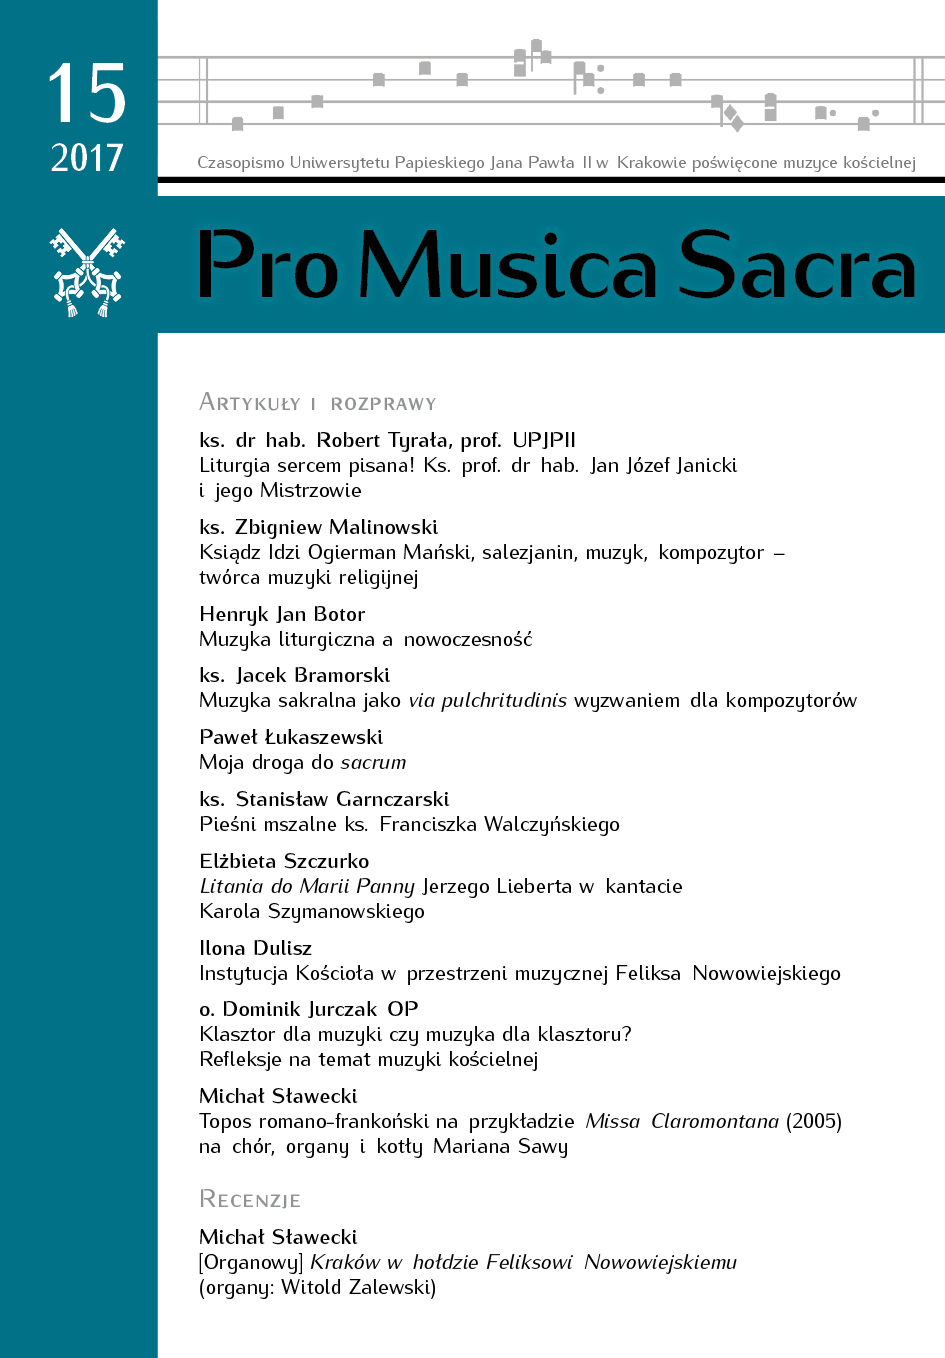 Report from the XIIth Days of Church Music in the Archdiocese of Krakow, November 17-21, 2016. Cover Image